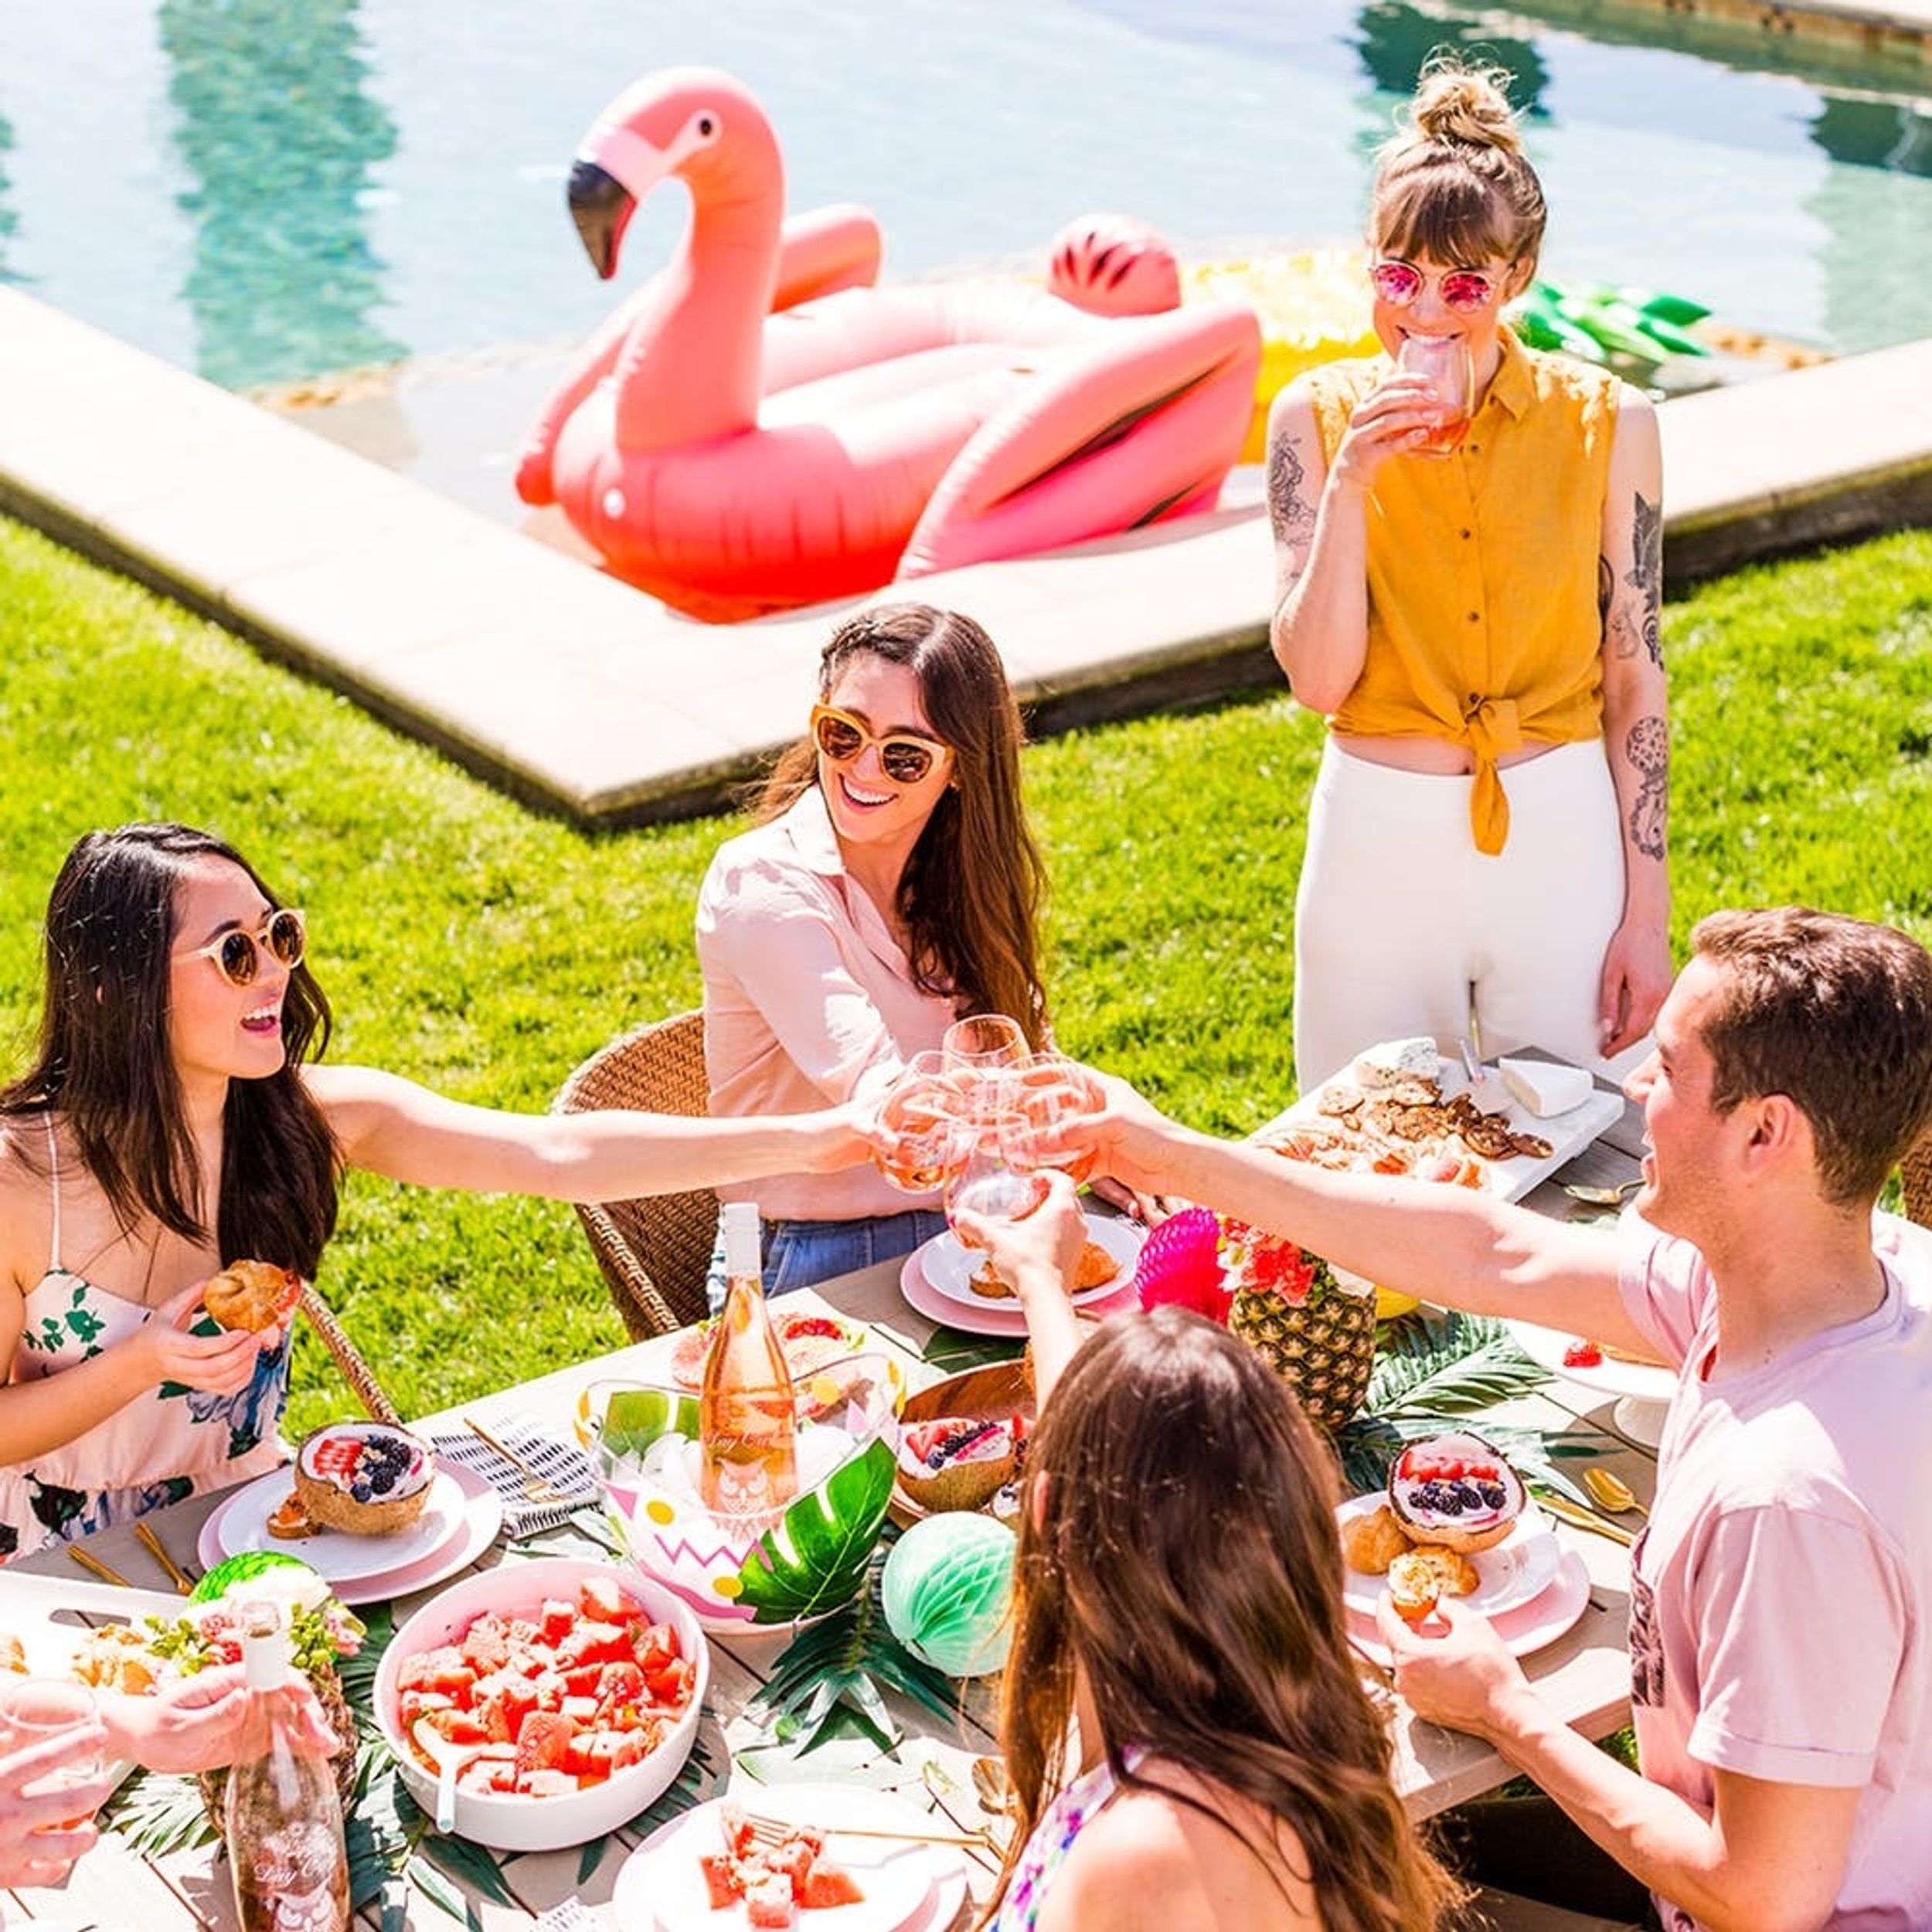 How to Bring Some Serious Summer Vibes to Your Next Outdoor Brunch